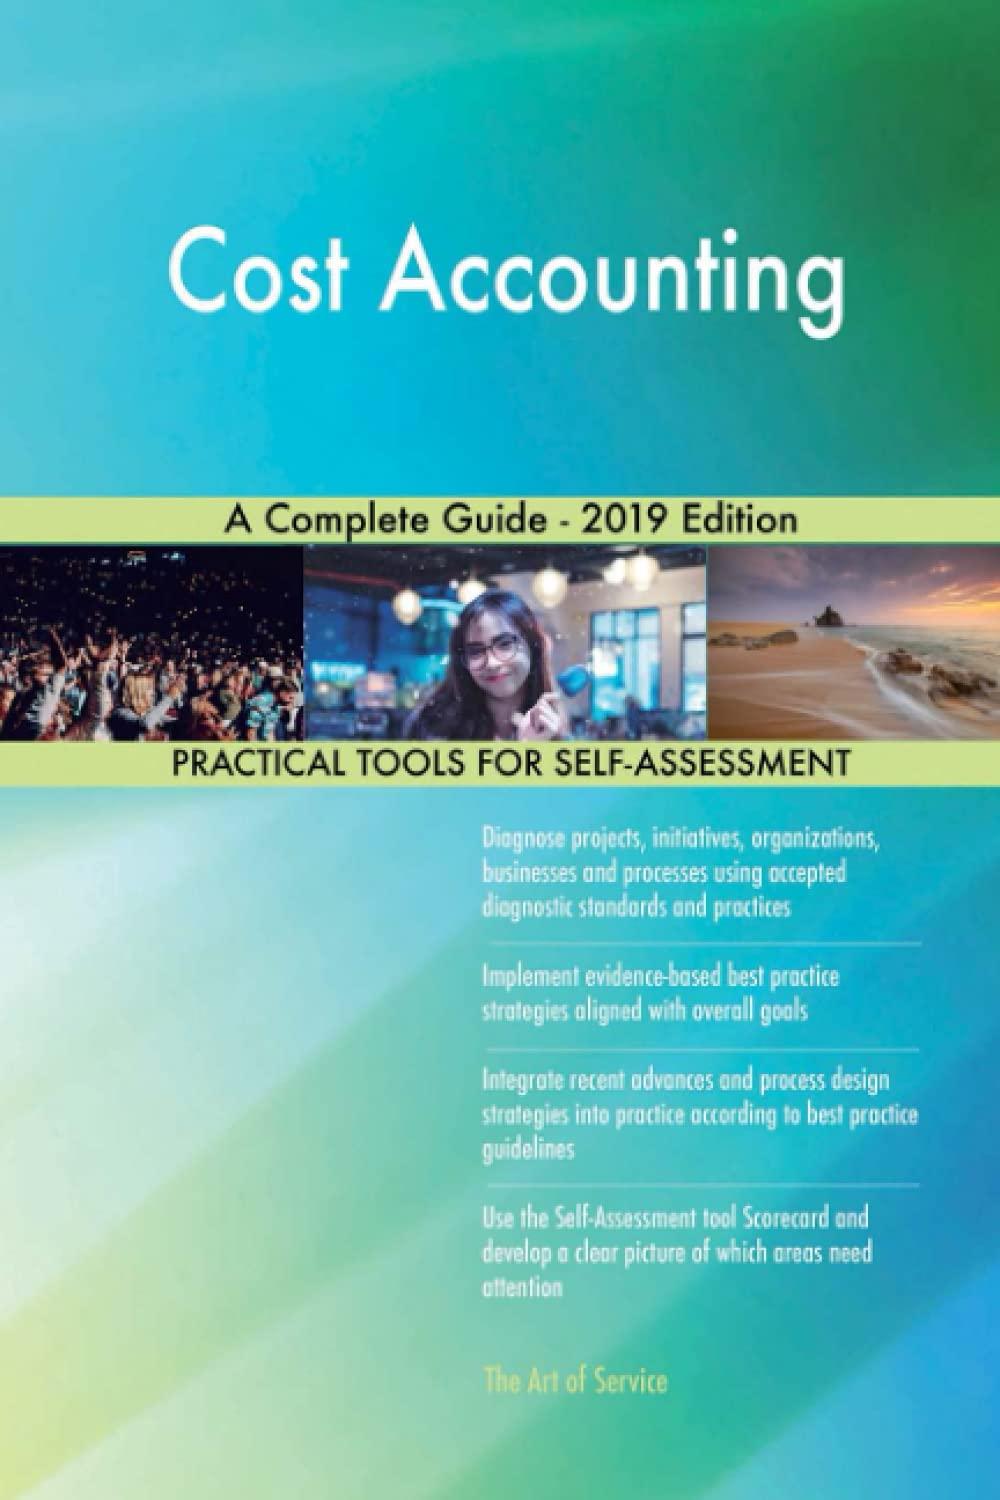 cost accounting a complete guide 2019th edition gerardus blokdyk 0655800425, 978-0655800422